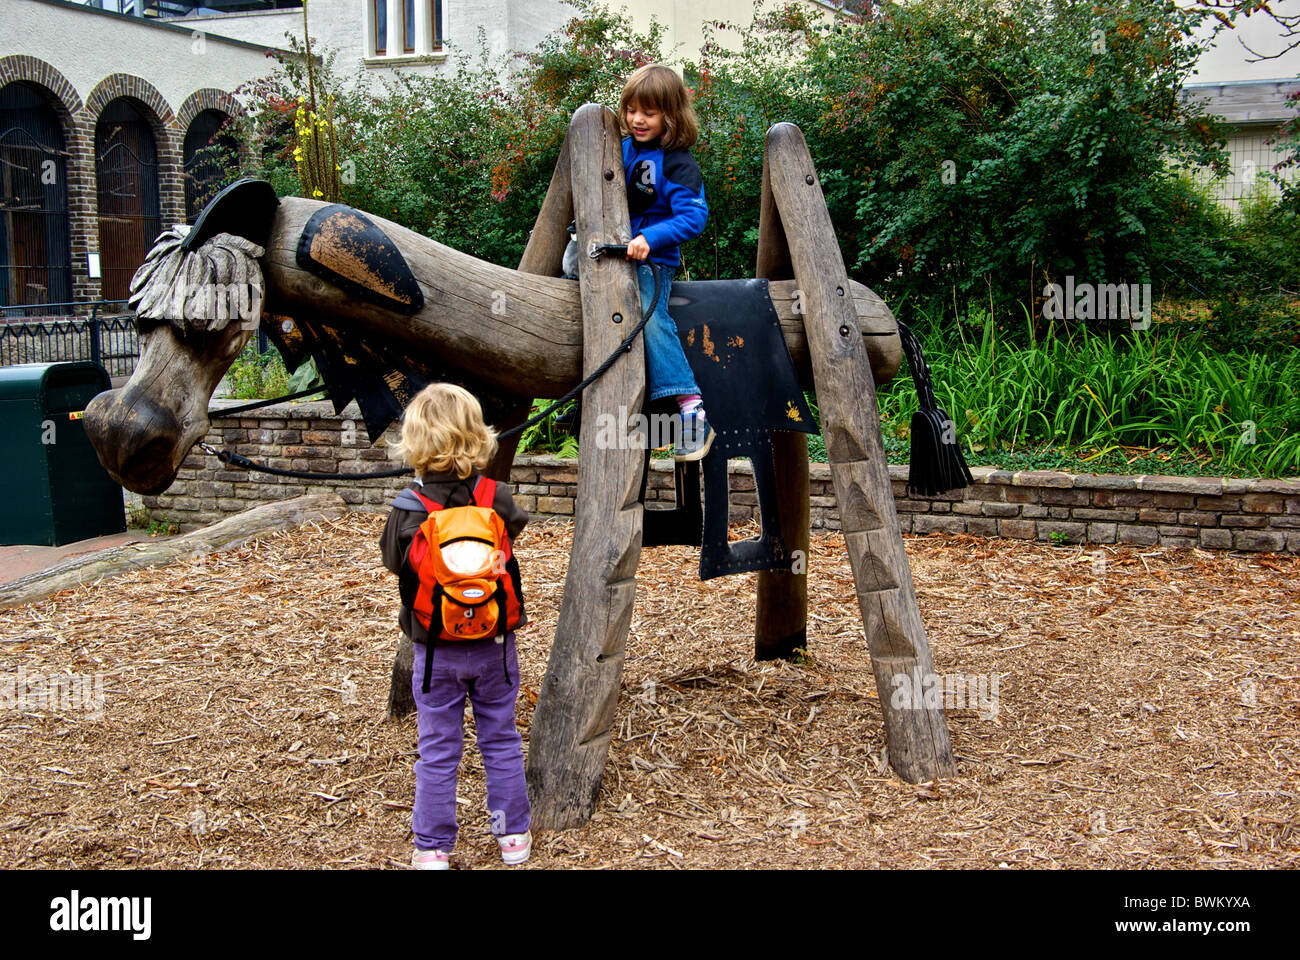 Children playing a stylized wooden horse at Leipzig Zoological Gardens Stock Photo